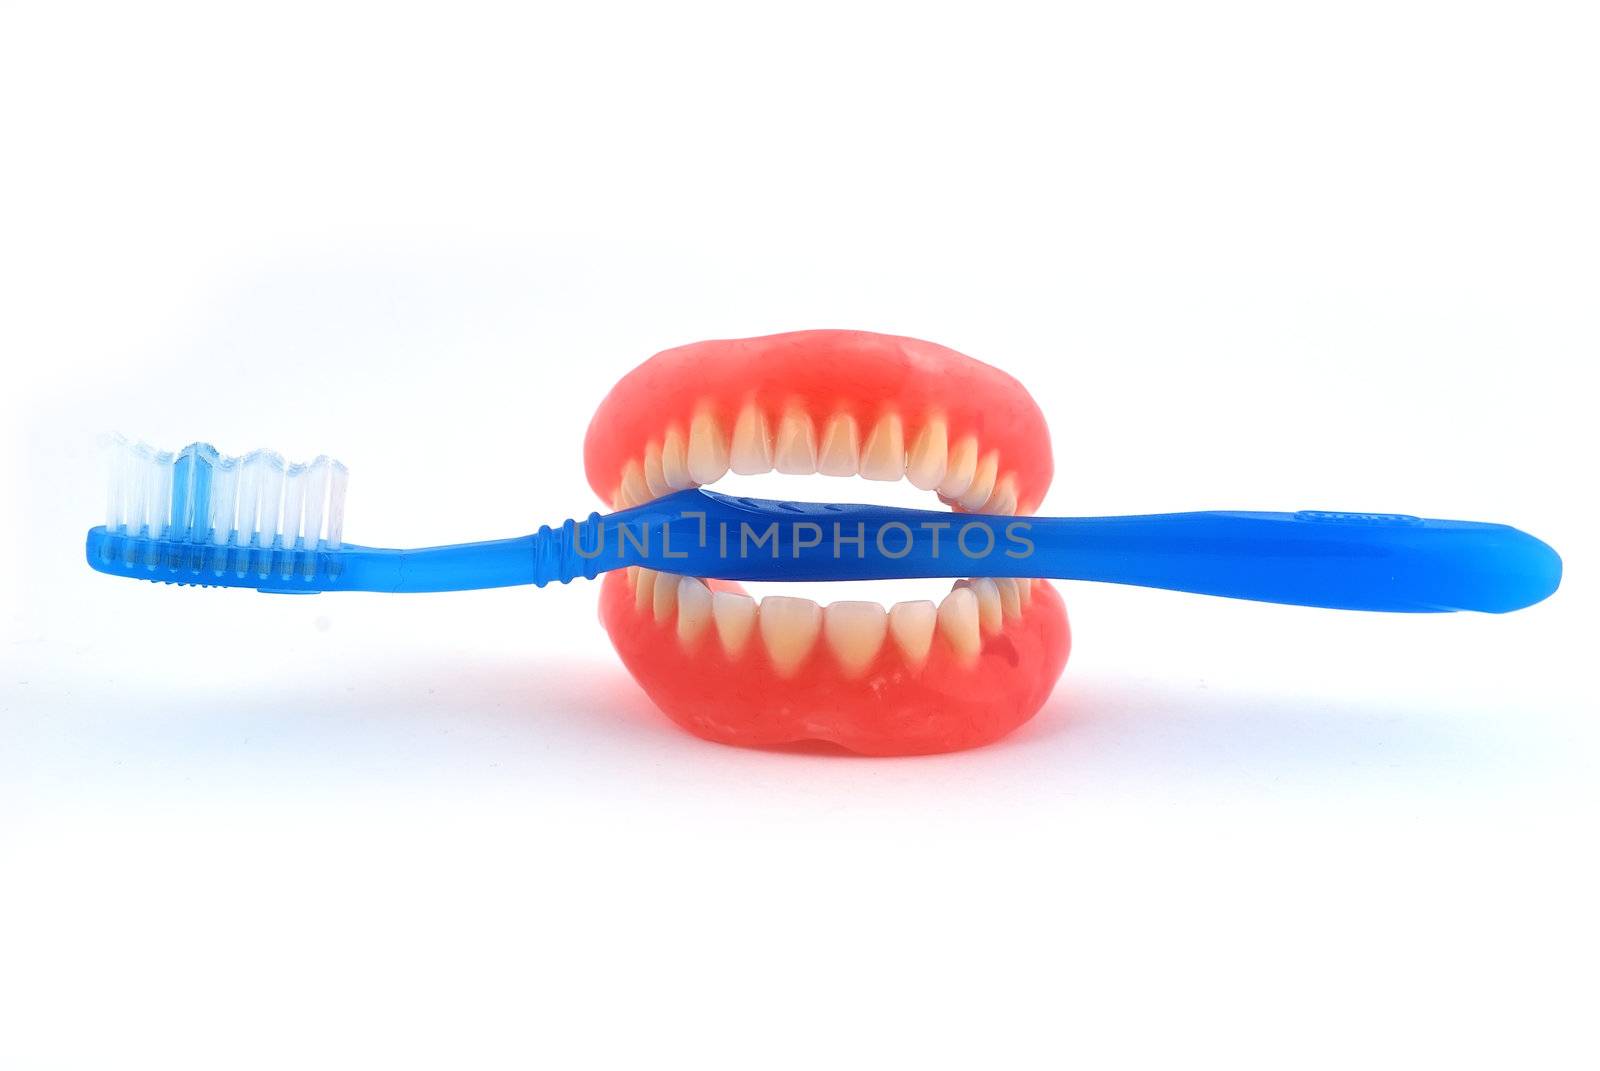 dentures and toothbrush on white background